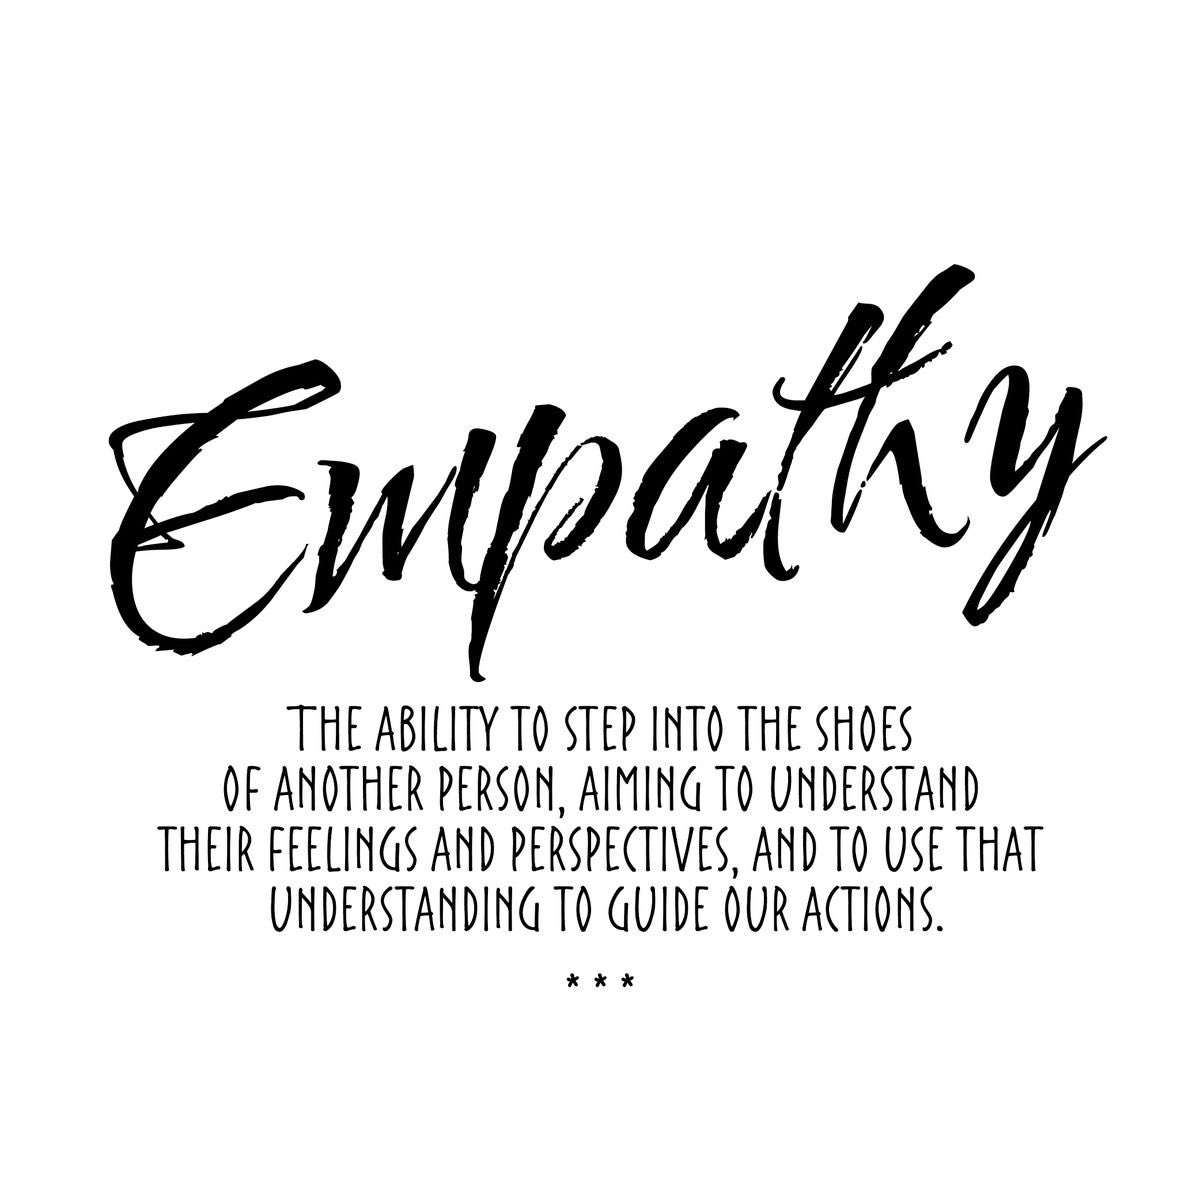 It has been so wonderful teaching empathy to our students this month @PetroskyPirates Big shout our to Mr. Hagan’s and Tan’s class for being so engaged during the lesson yesterday! @AliefISD @AliefCounseling